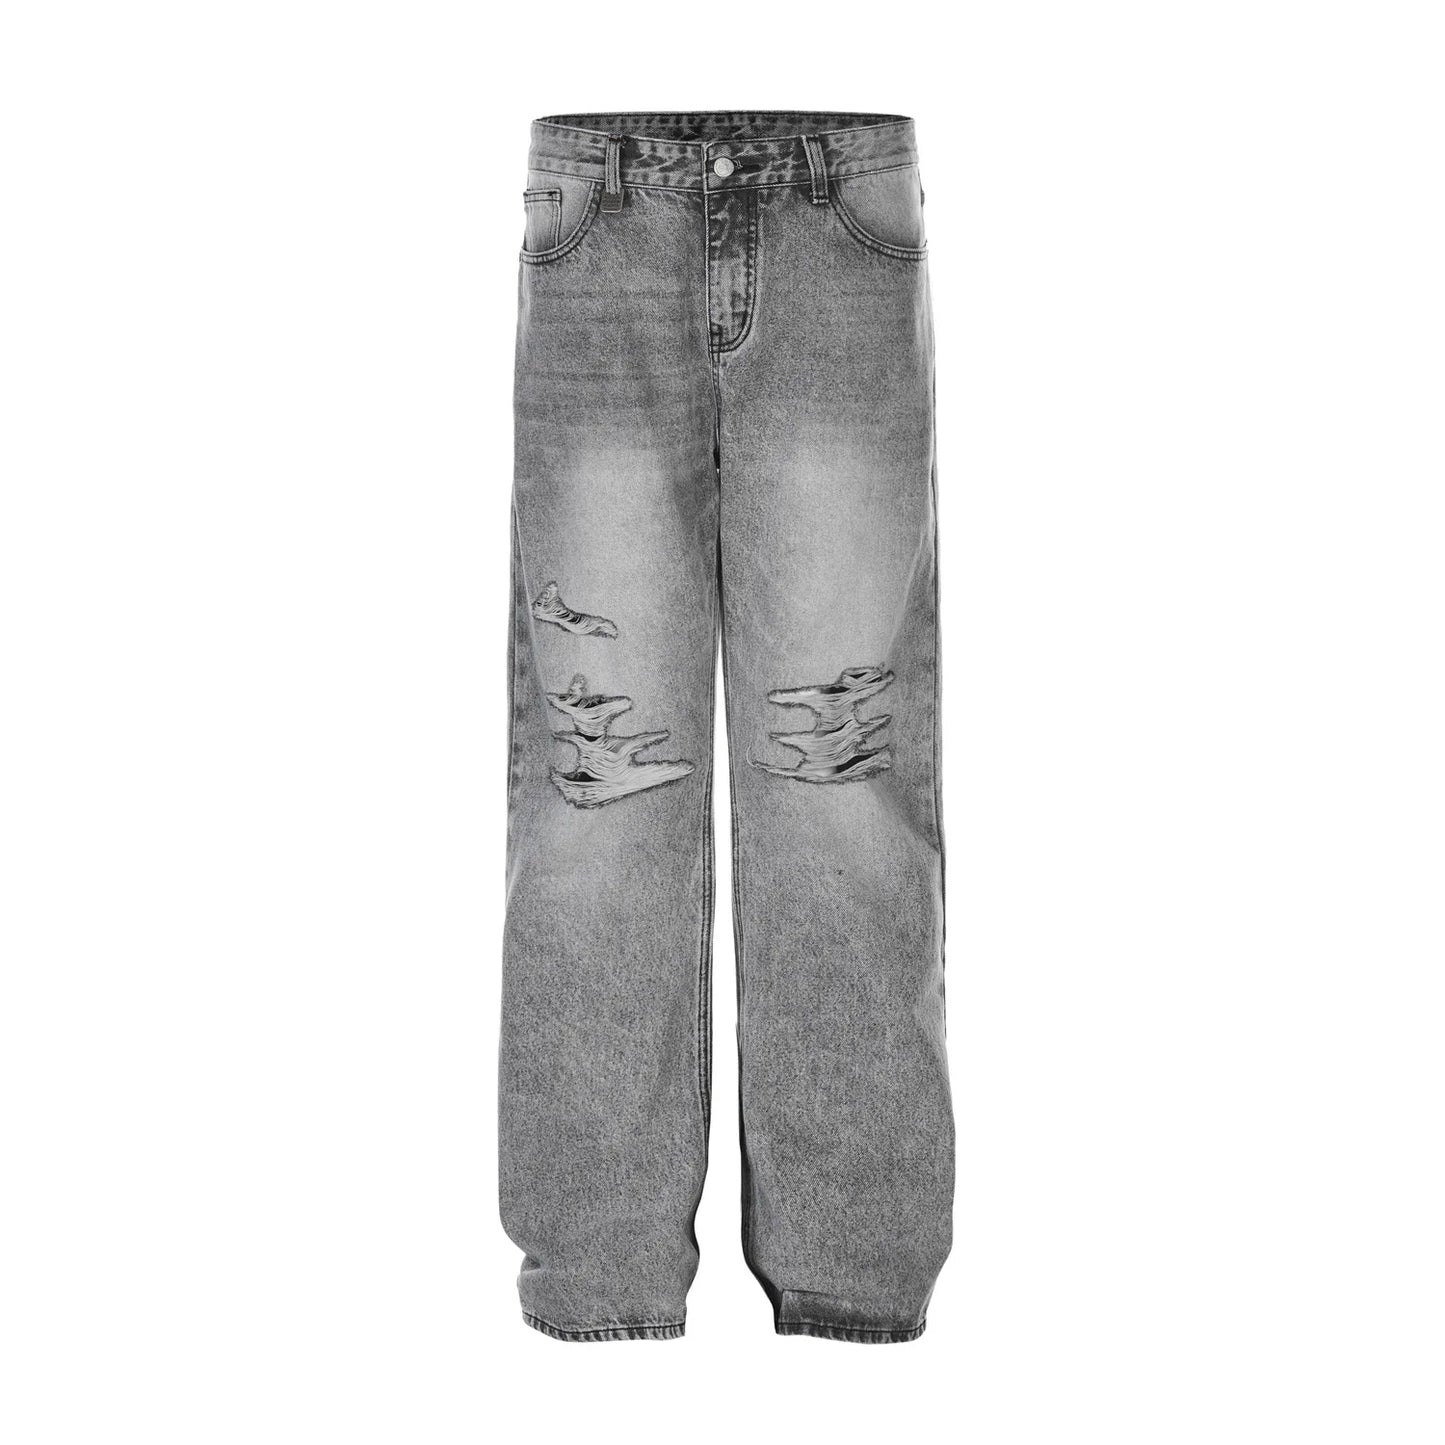 Haruja - Washed Damaged Ripped Grey Jeans